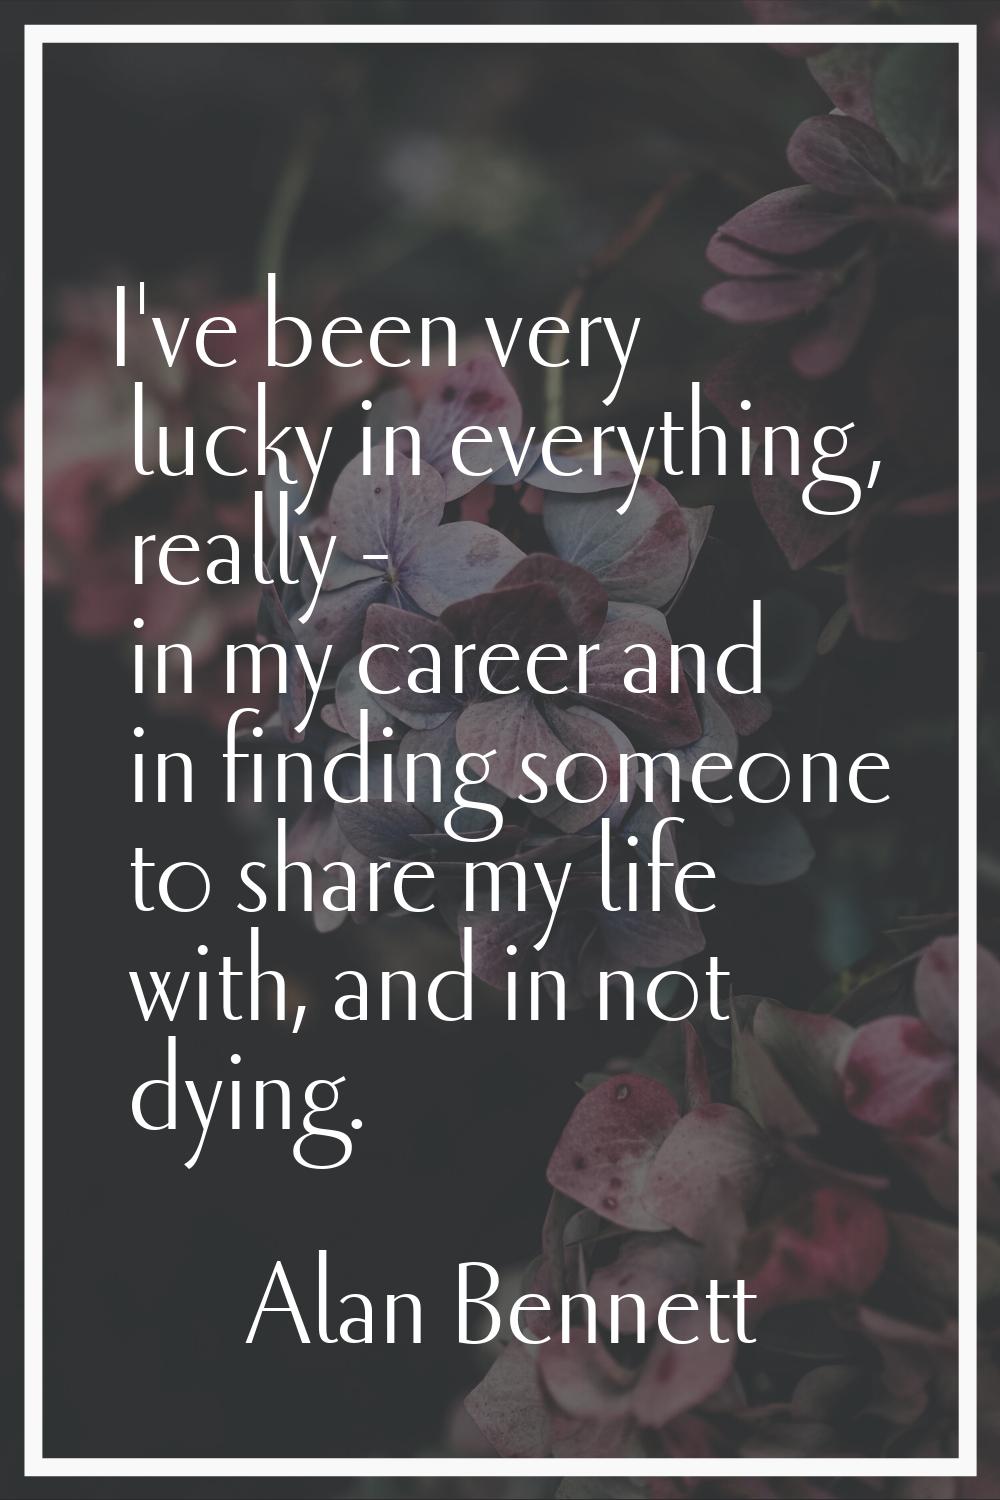 I've been very lucky in everything, really - in my career and in finding someone to share my life w